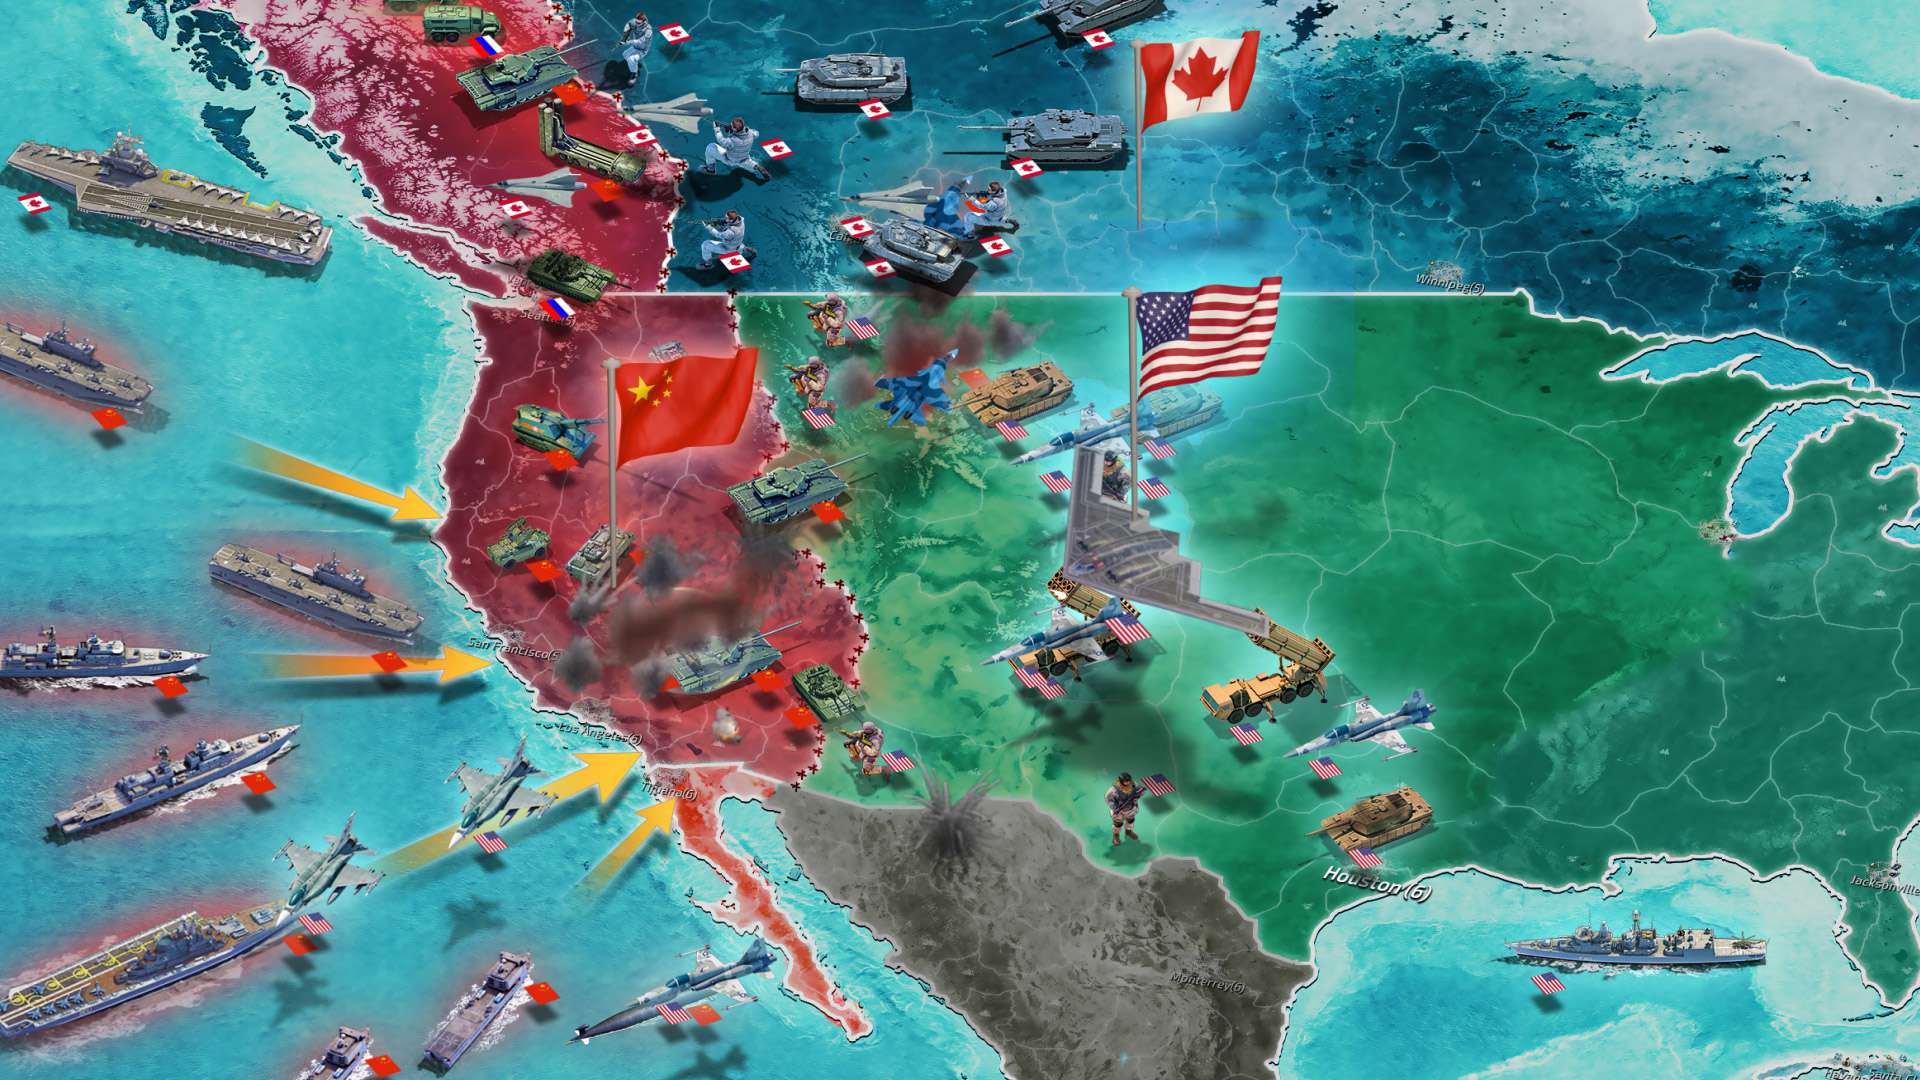 Taboola Ad Example 34838 - The WW3 Strategy Game! Register And Play For Free Right Now, No Download Required.